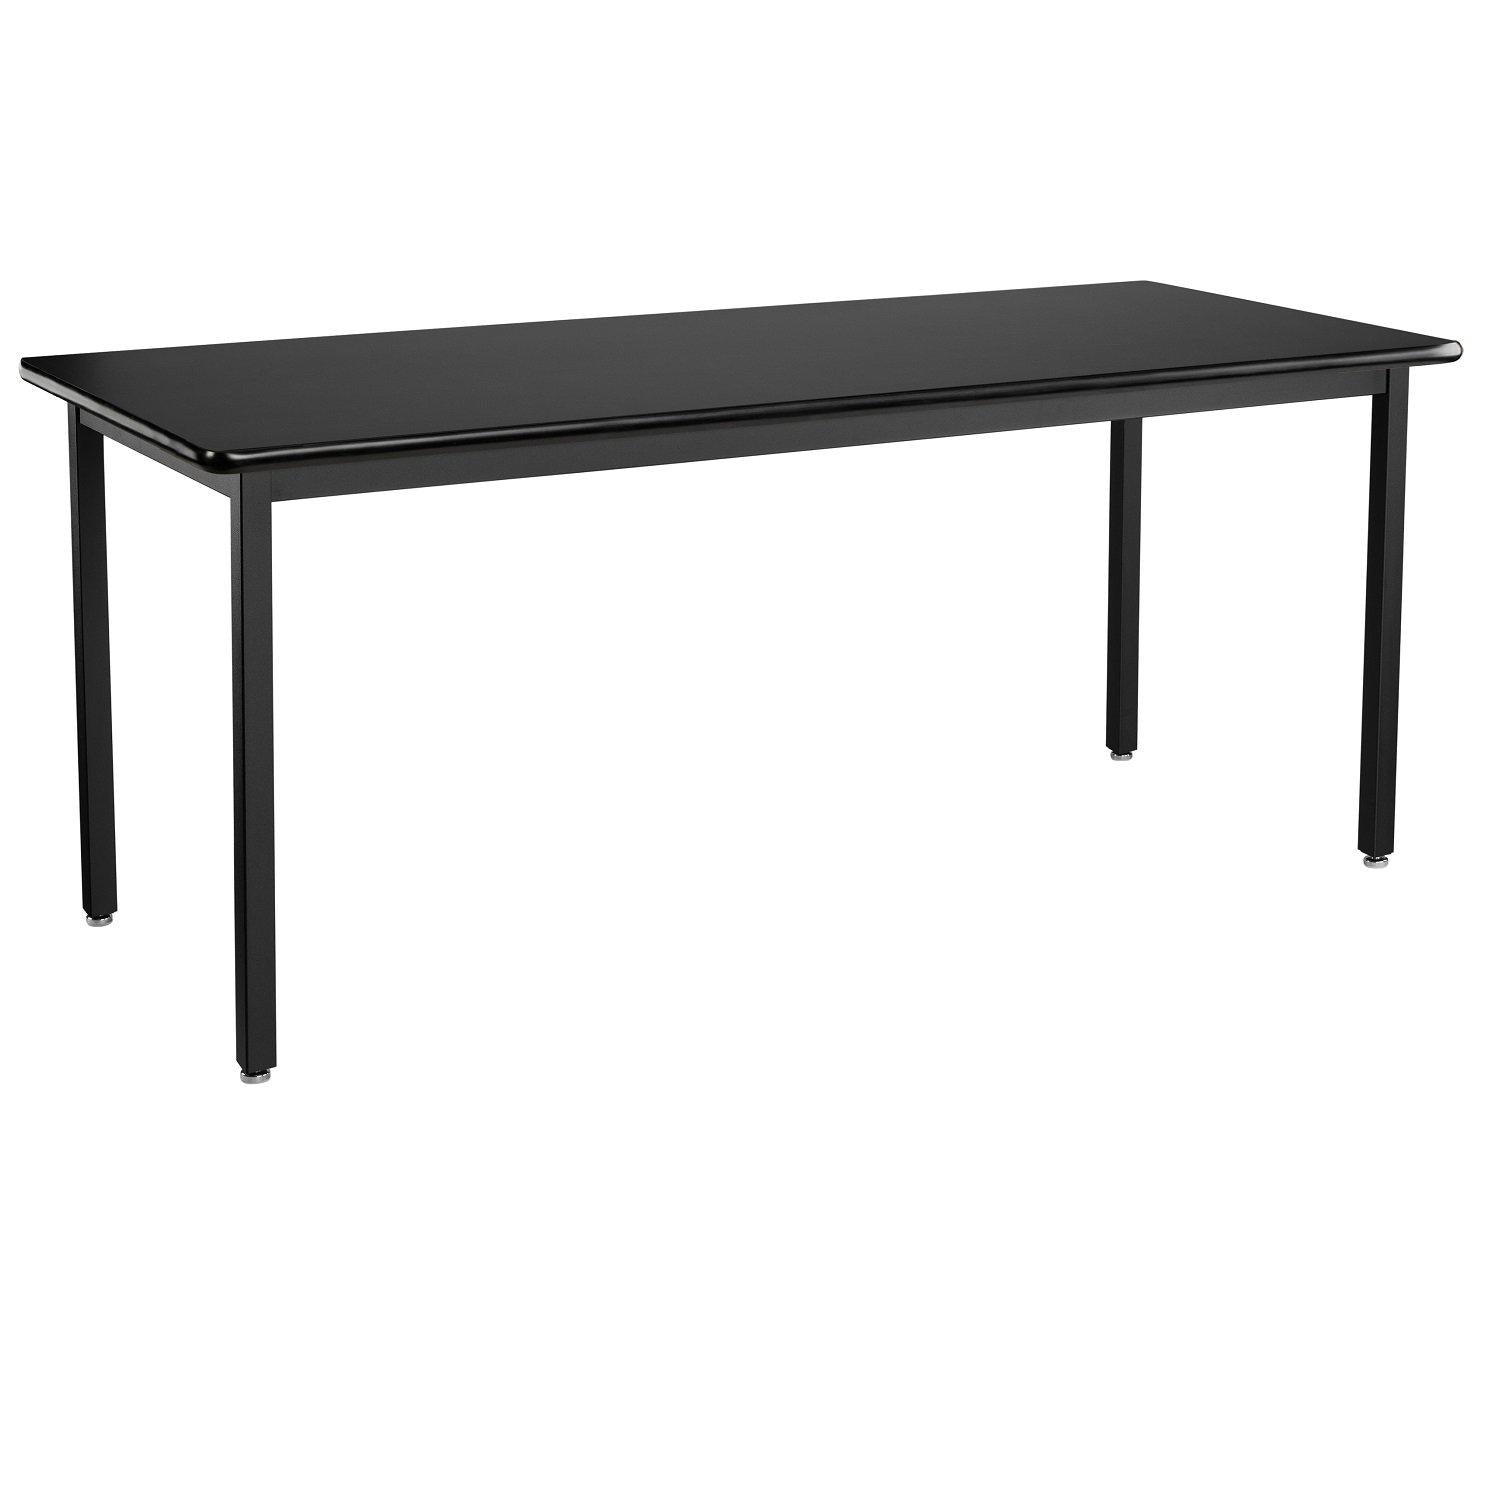 Heavy-Duty Fixed Height Utility Table, Black Frame, 30" x 72", High-Pressure Laminate Top with T-Mold Edge